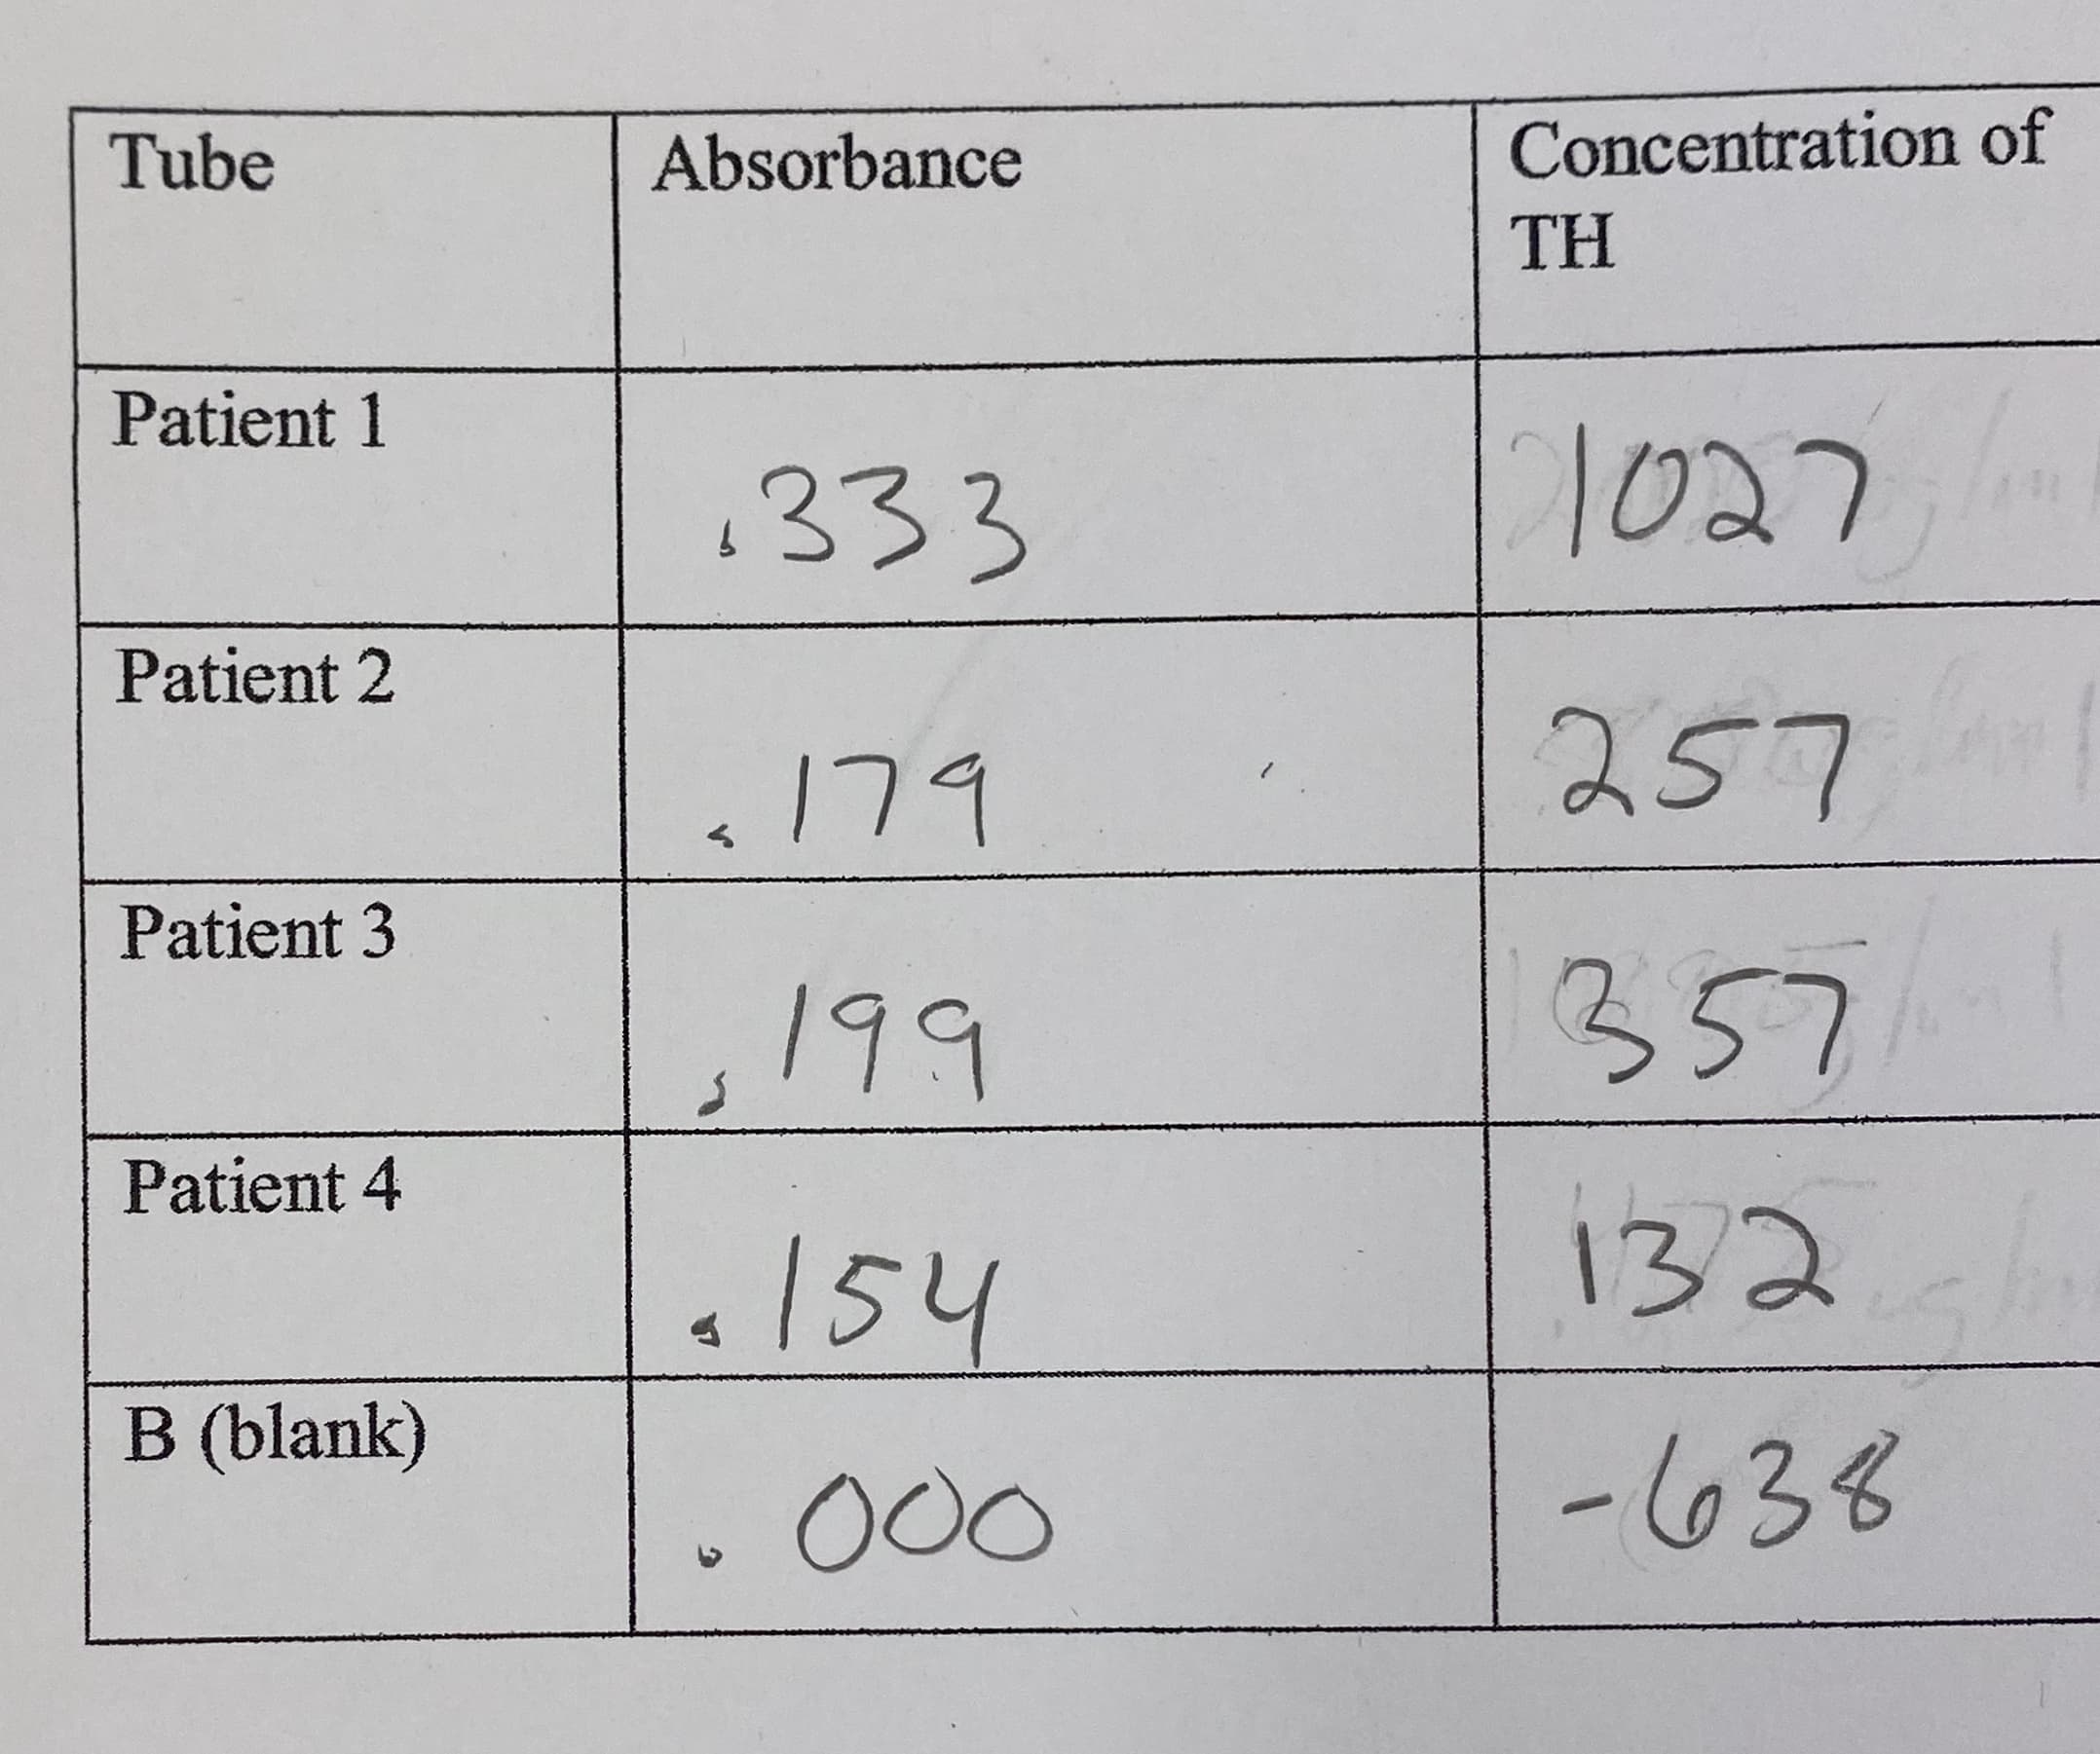 Concentration of
Tube
Absorbance
TH
Patient 1
1027
1333
Patient 2
257
-179
Patient 3
357
199
Patient 4
132
.154
B (blank)
-638
000
